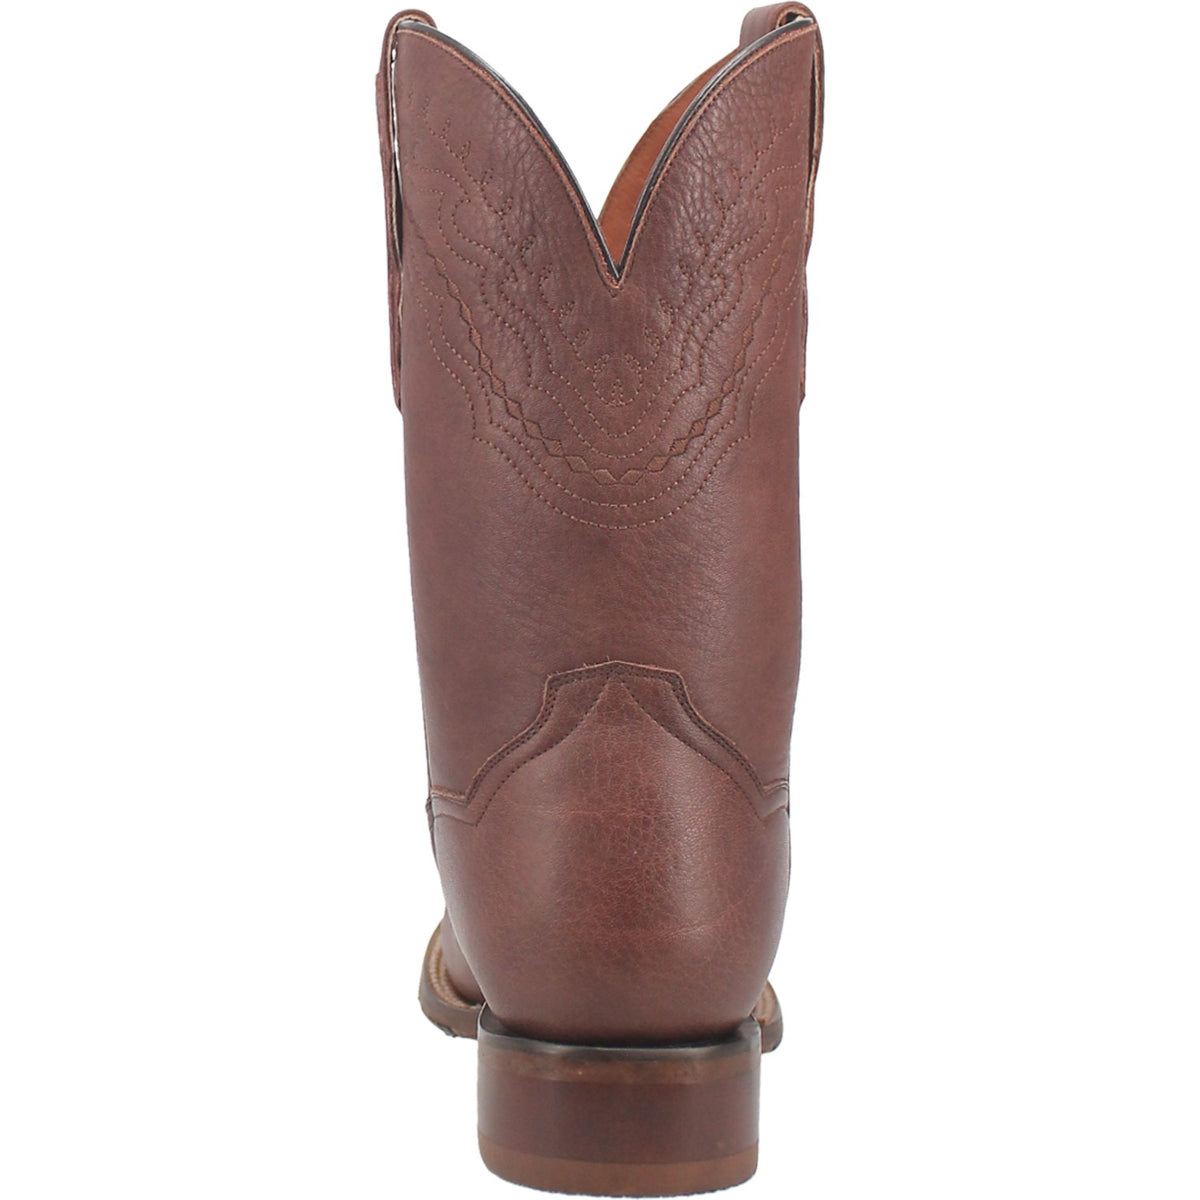 MILO LEATHER BOOT Cover